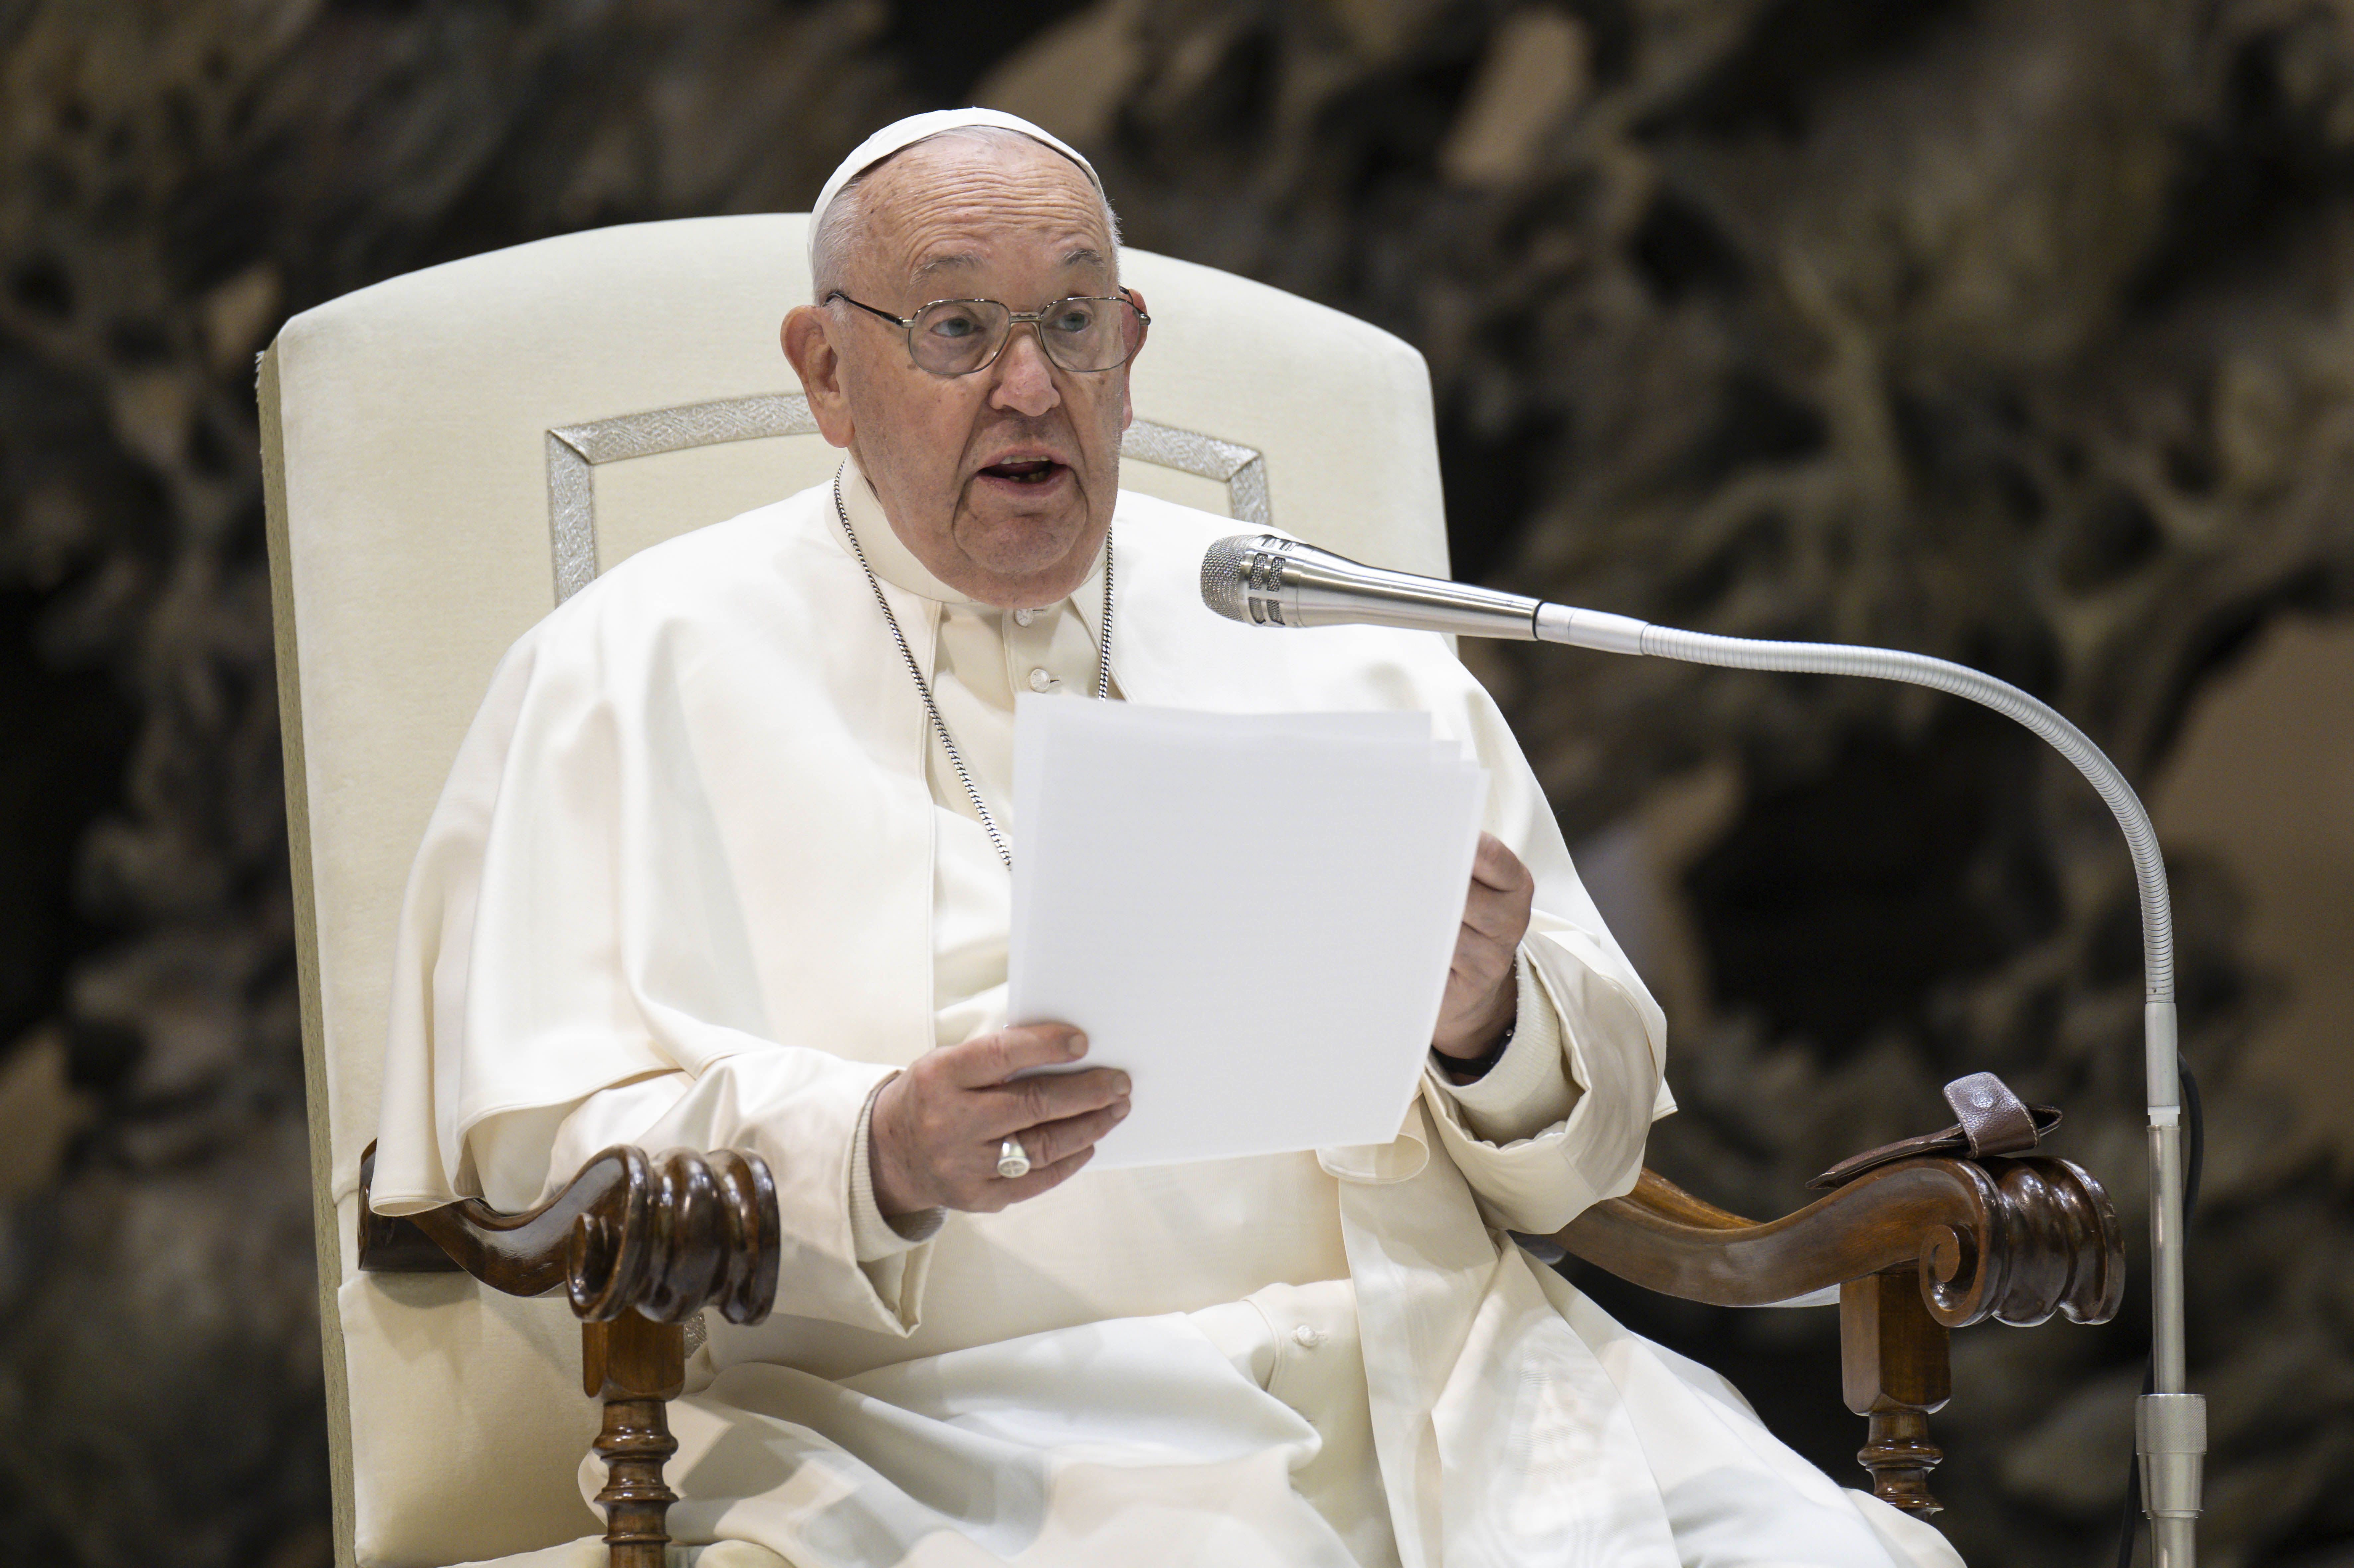 Pope Francis: We need to ‘welcome God into our daily lives’